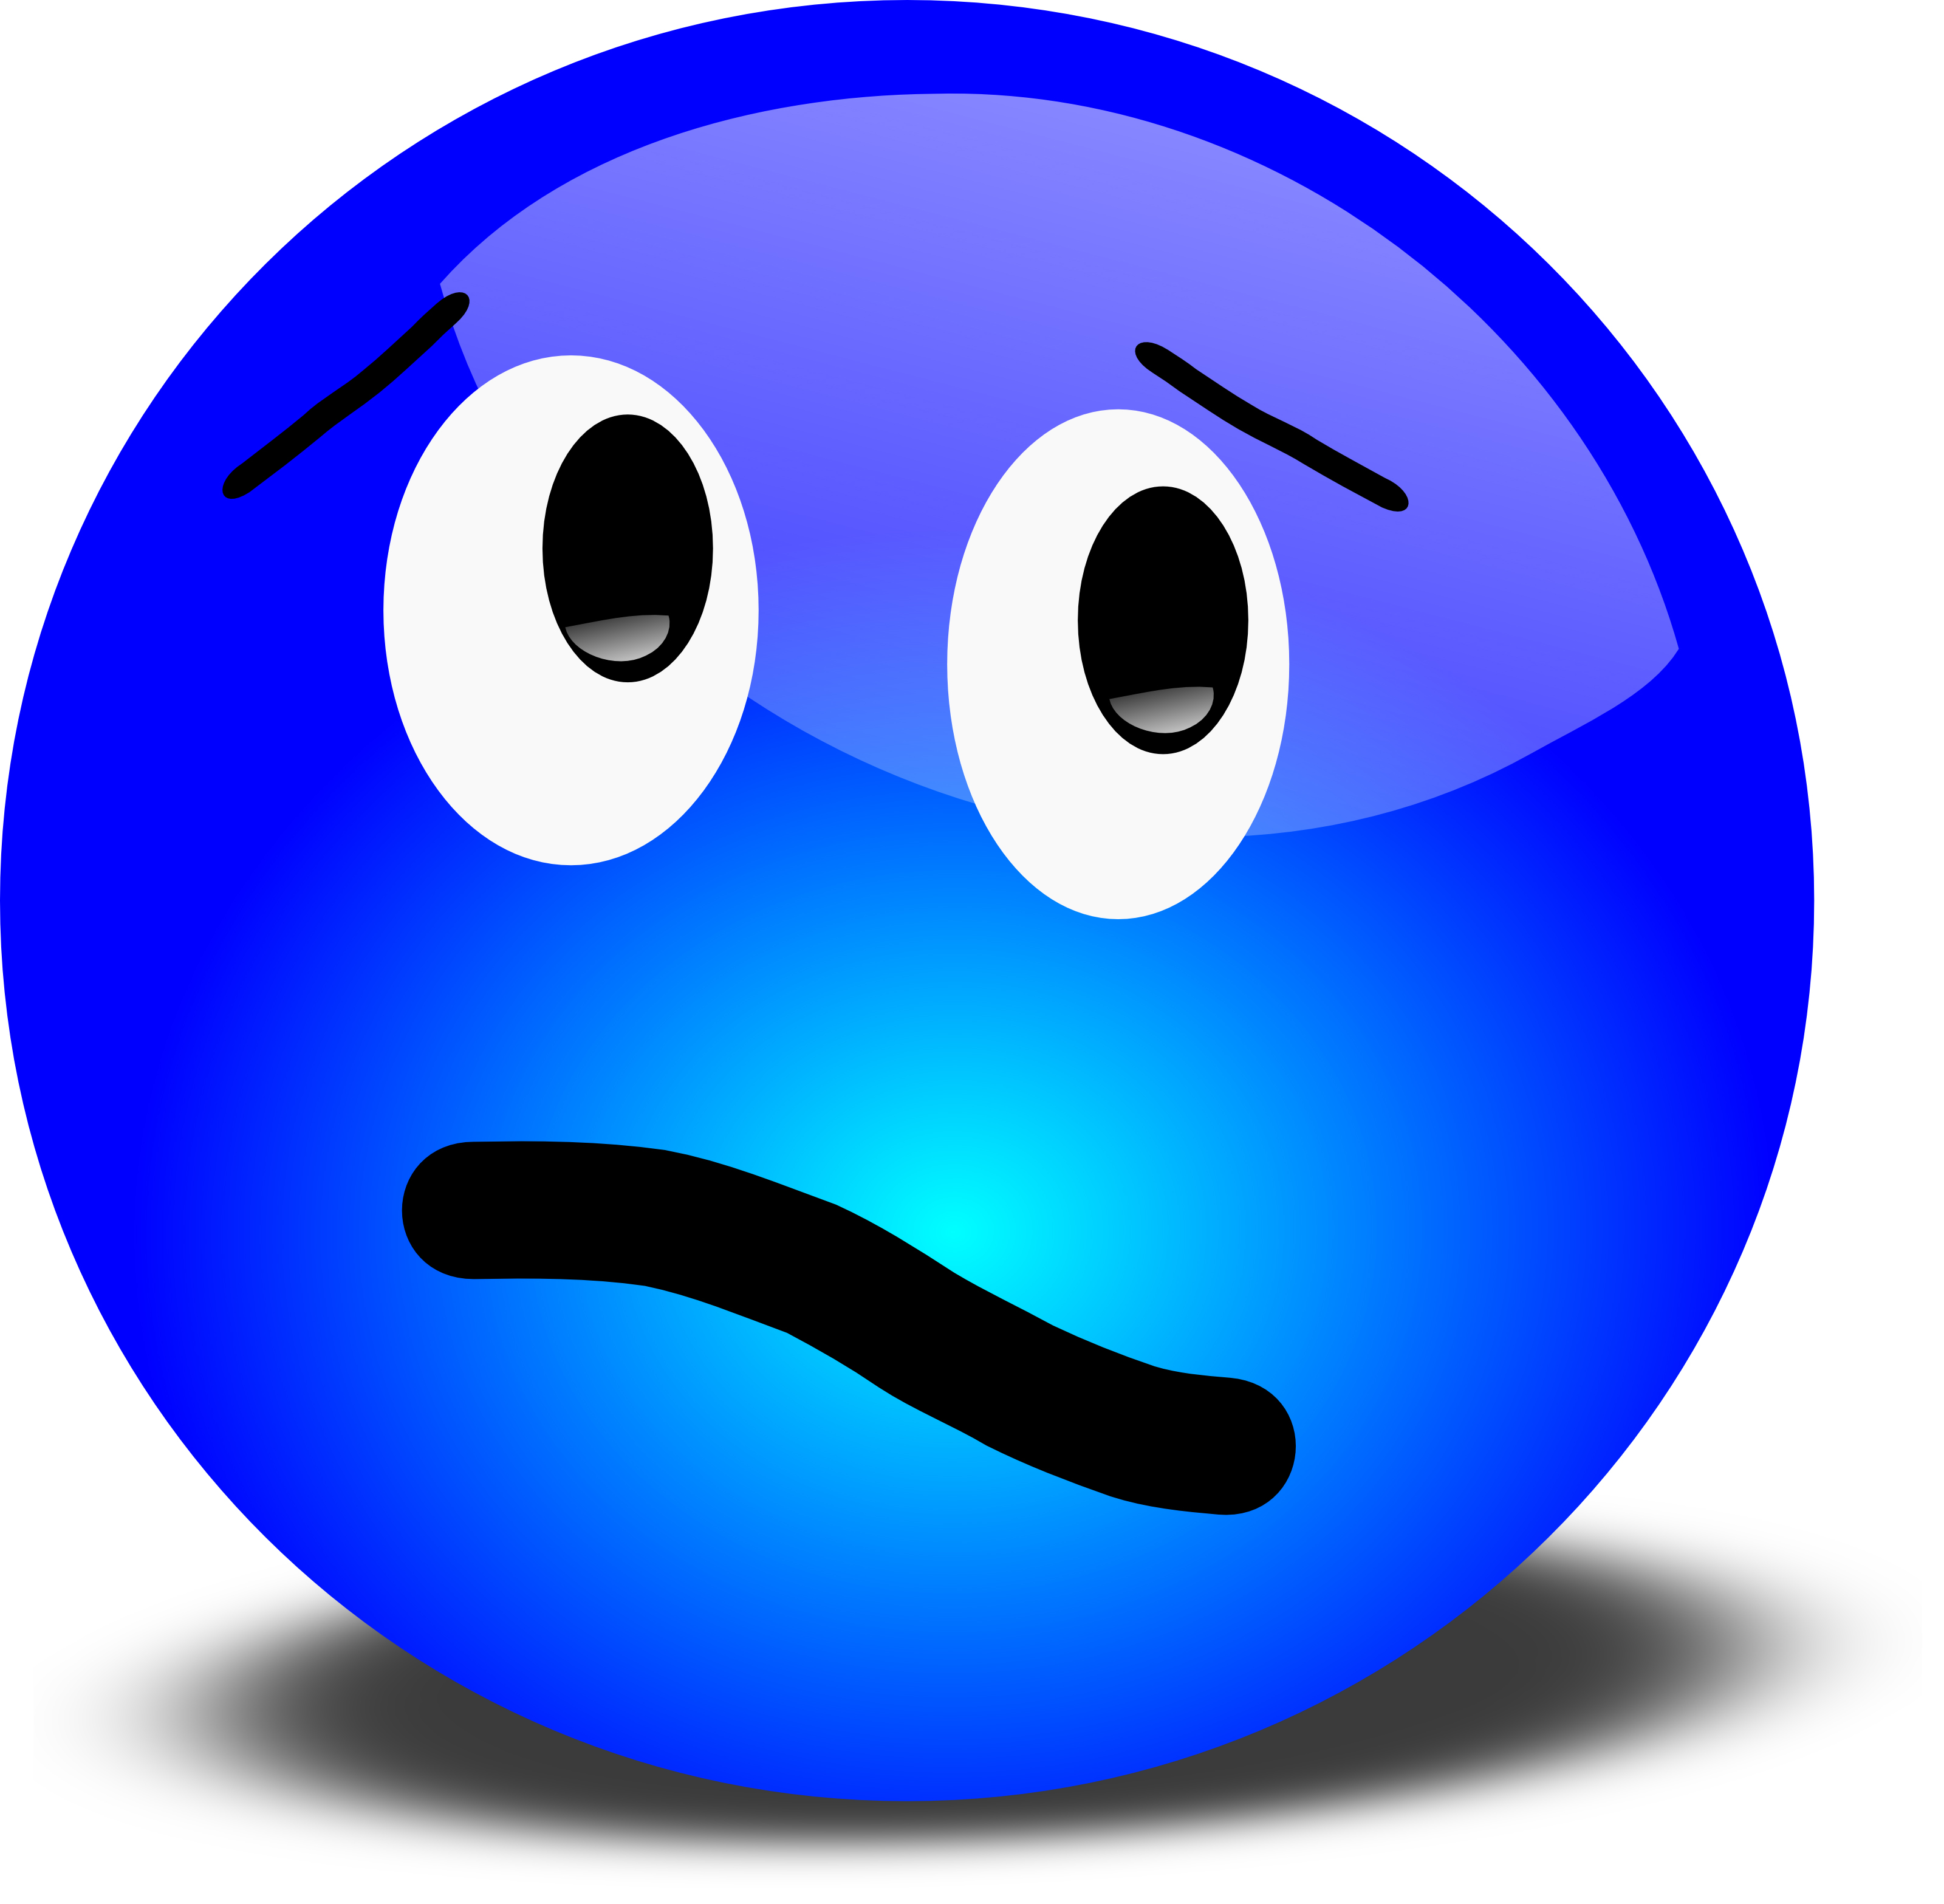 15 Sad Faces Images Free Cliparts That You Can Download To You